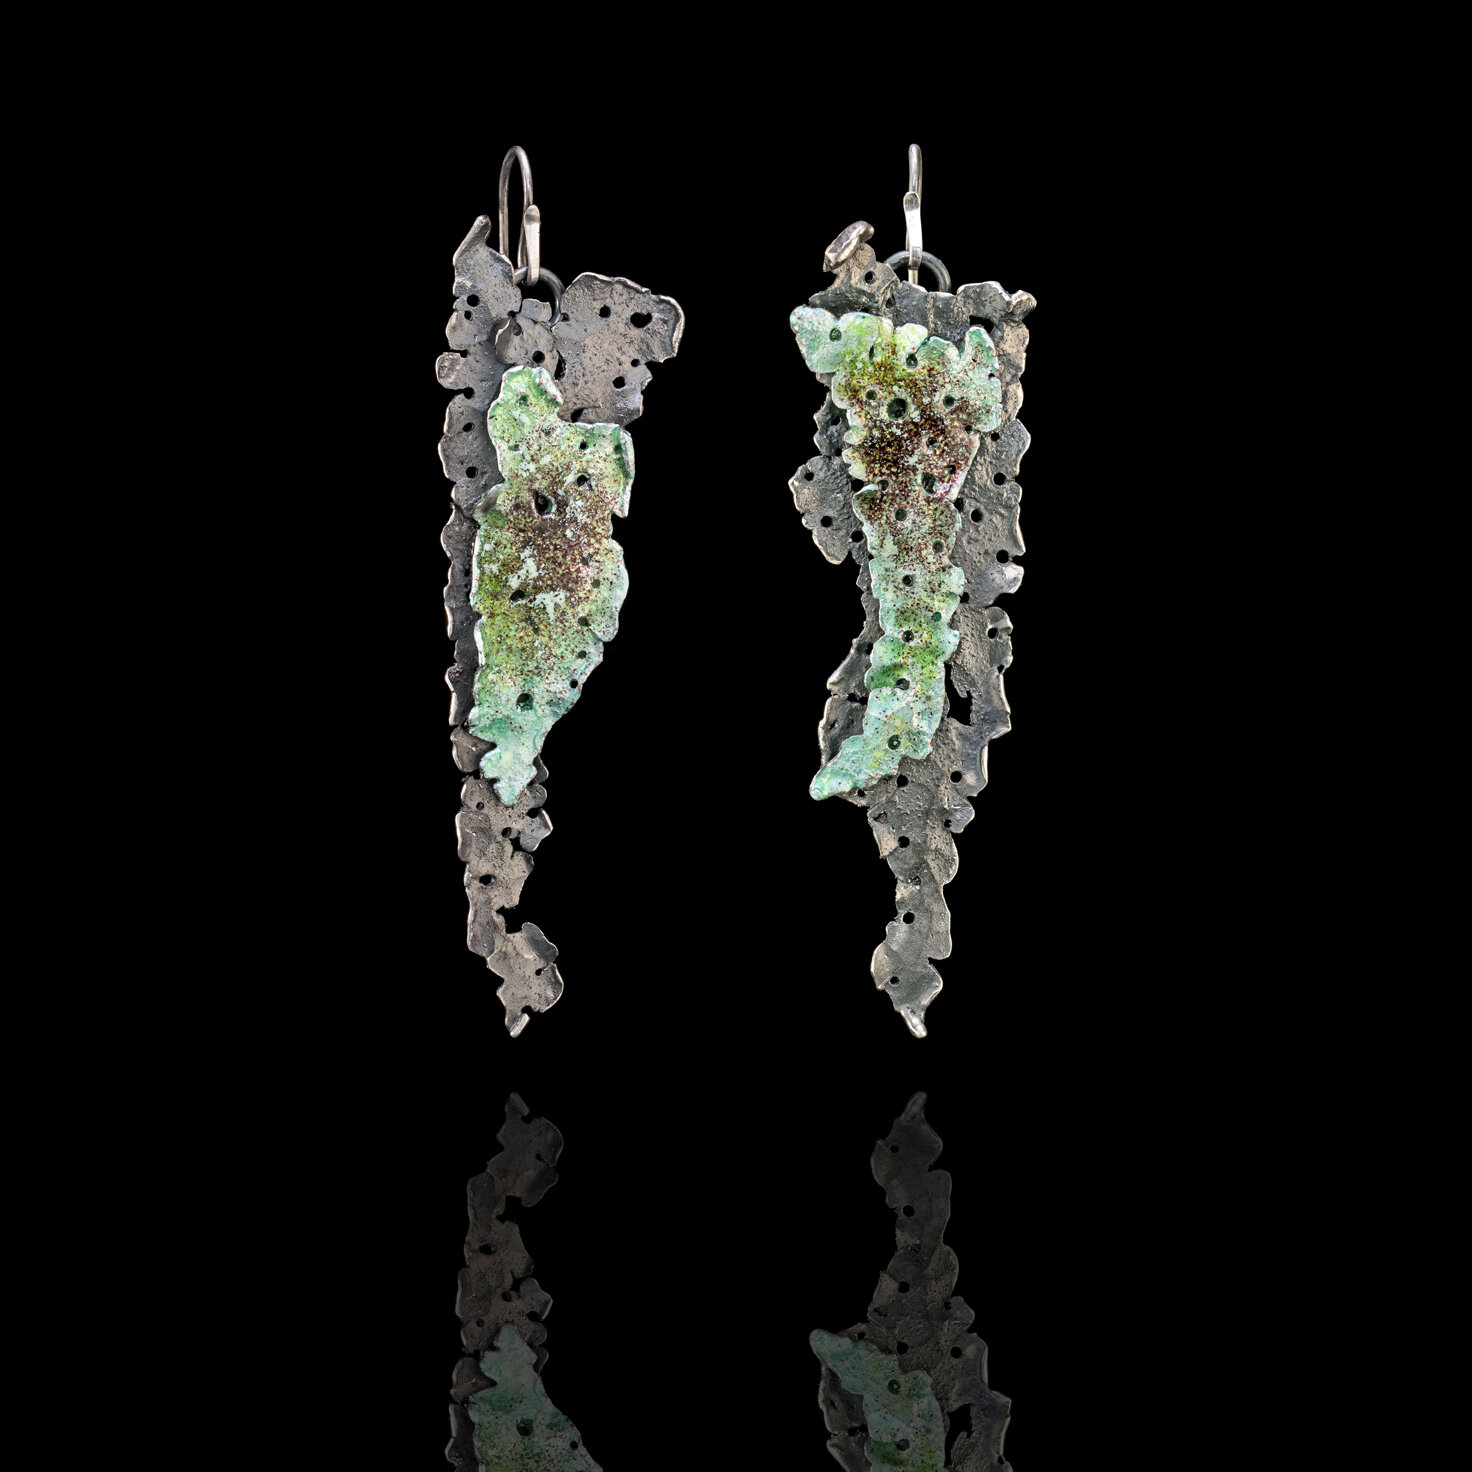 Large Flavoparmelia Caperata Dangly Earring IV - Volume 3 - Abigail Brown